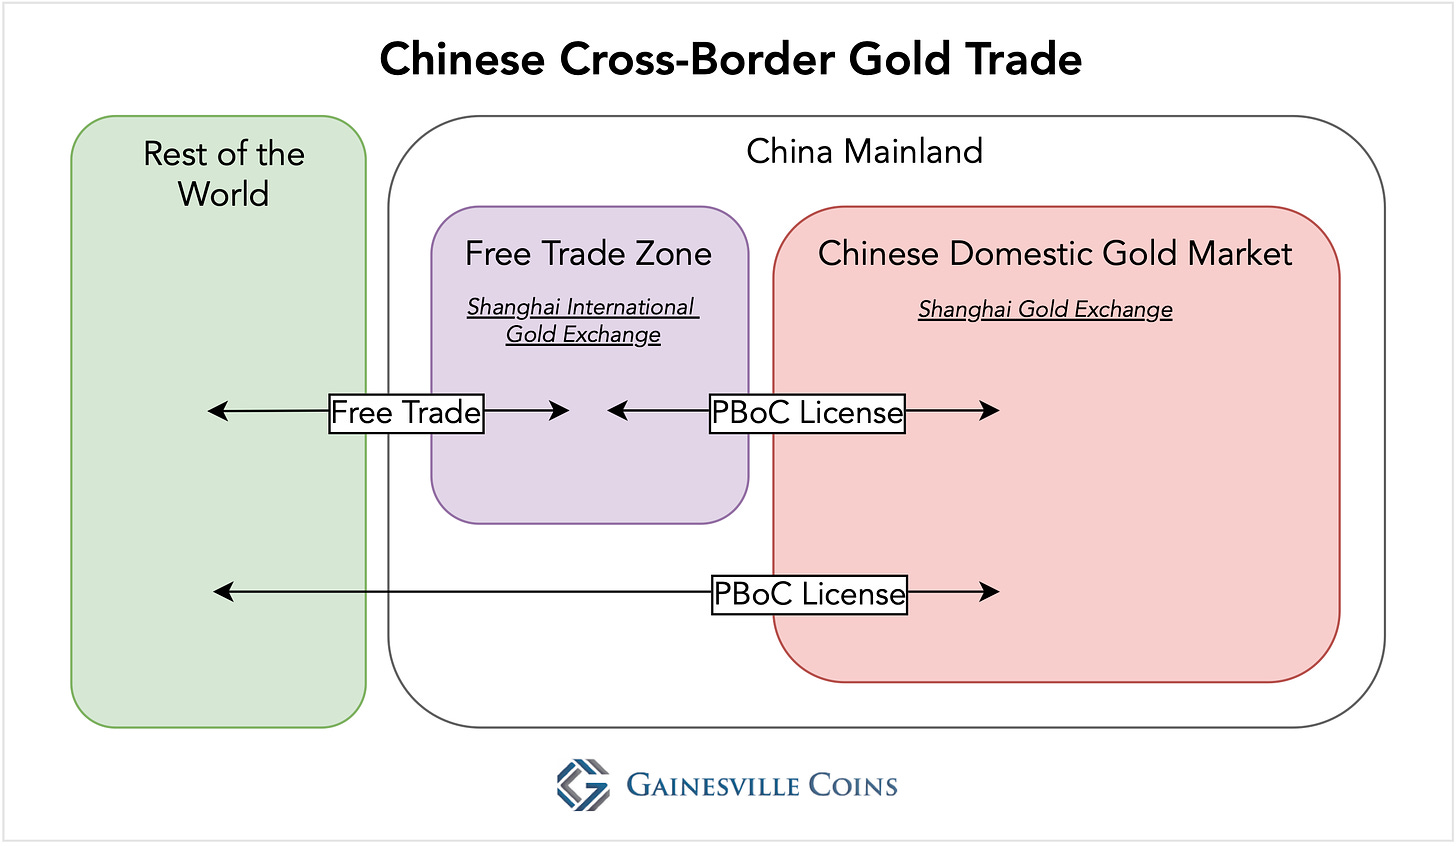 diagram showing the flow of cross-border trade in the Chinese gold market